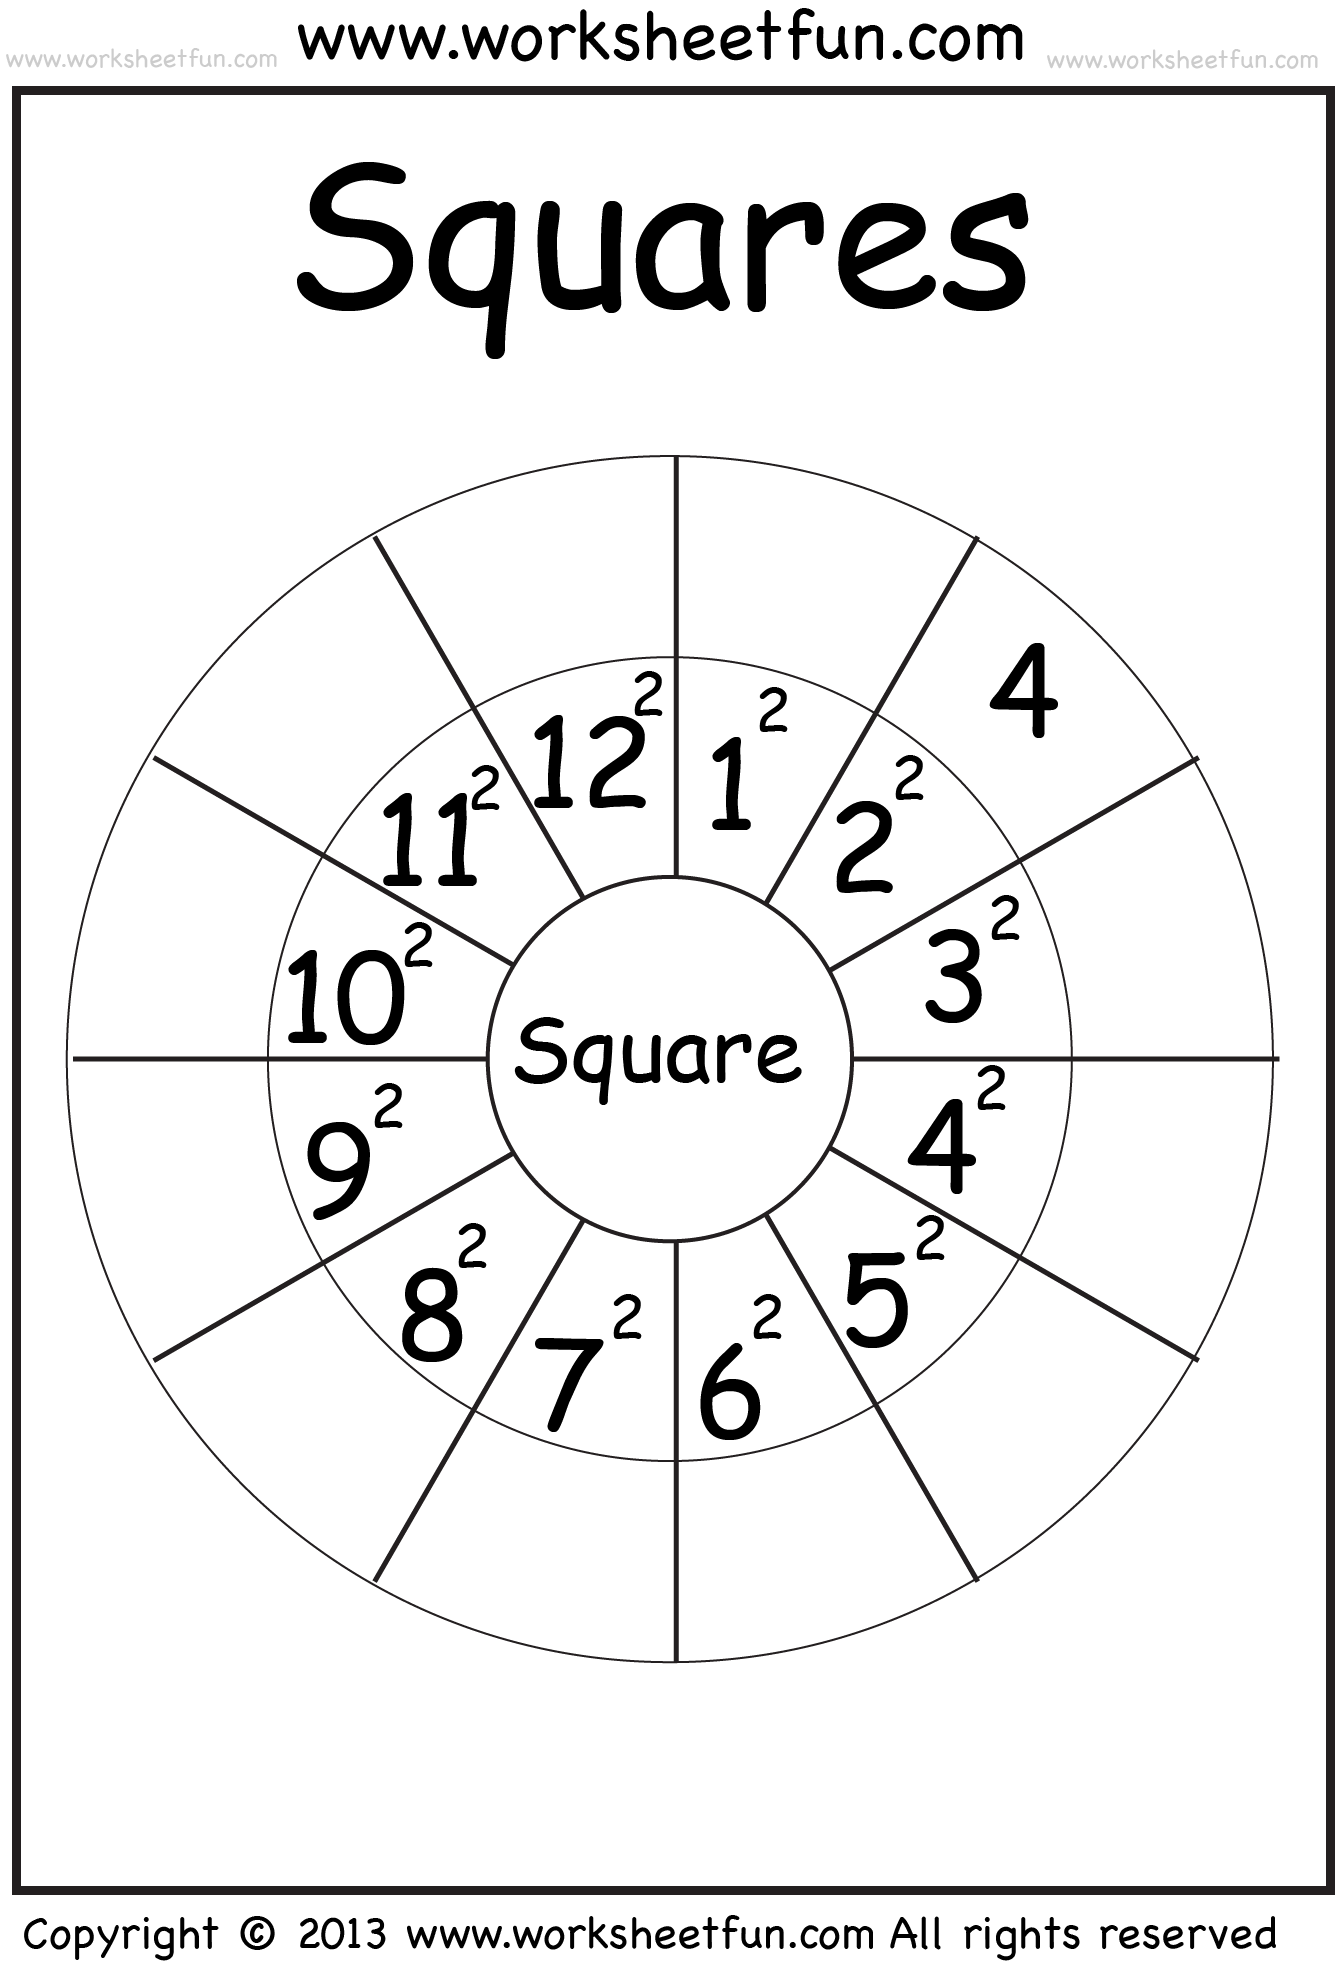 Square Numbers Free Worksheets